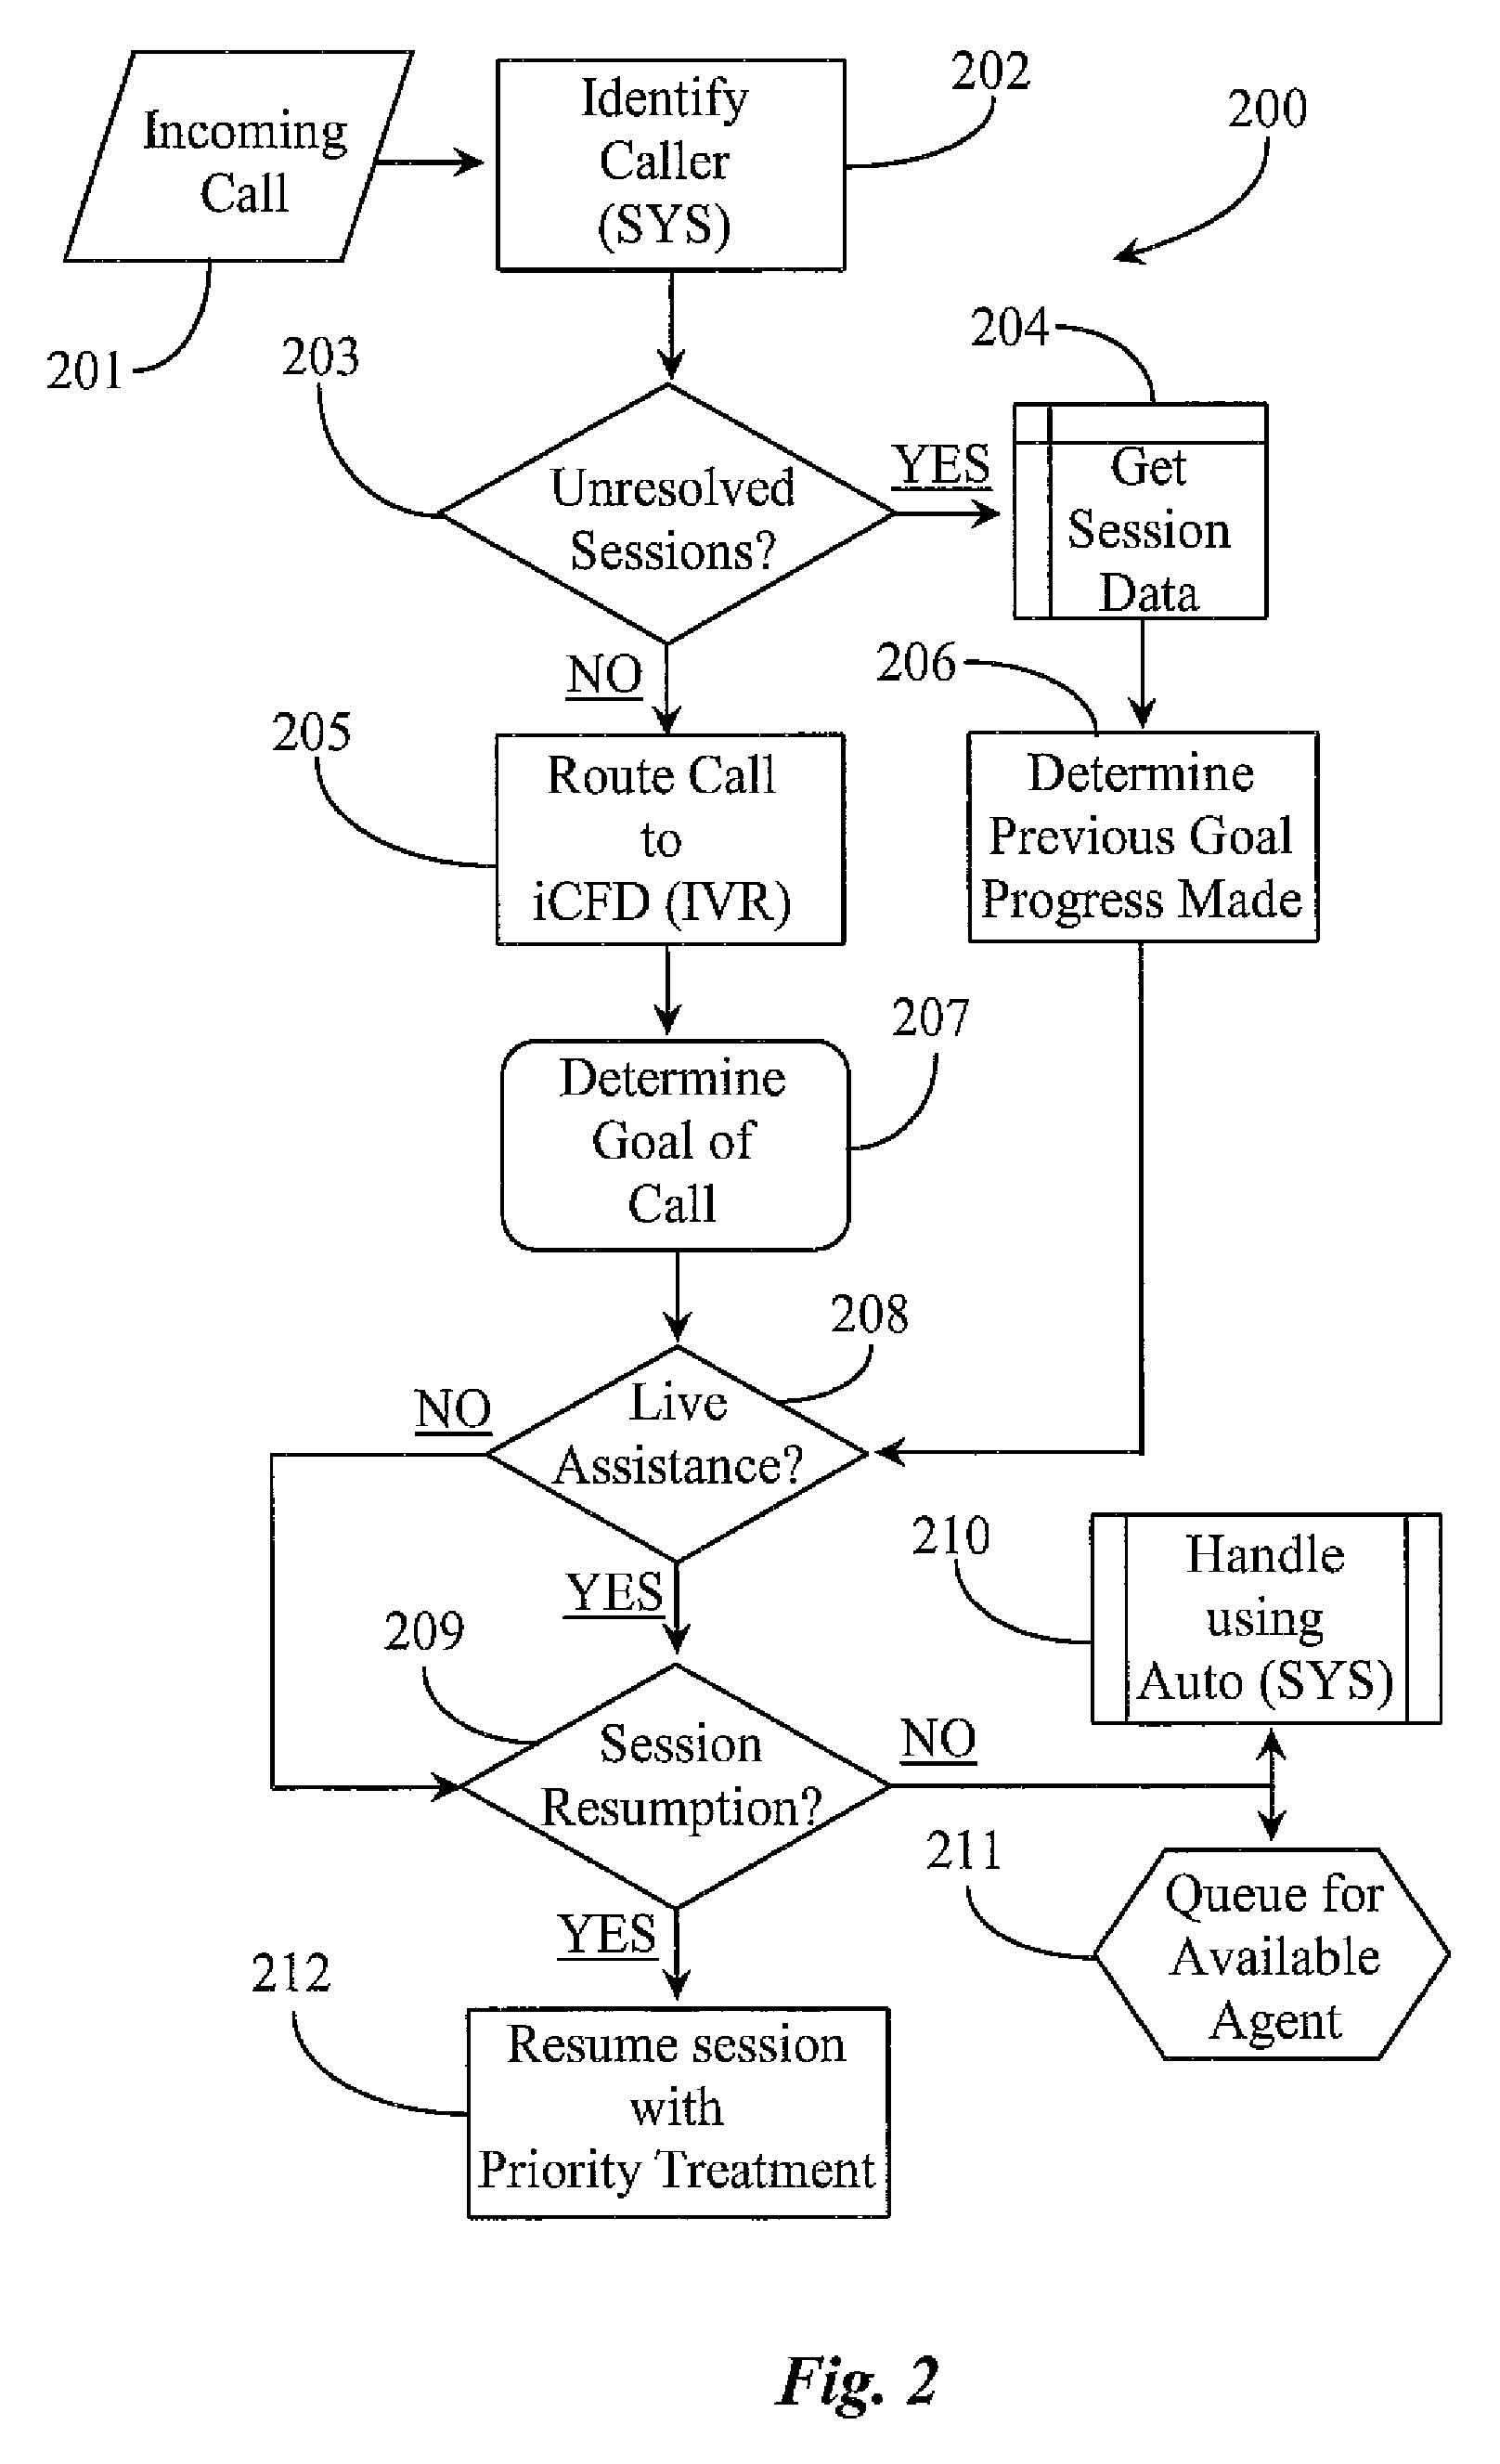 System and methods for tracking unresolved customer involvement with a service organization and automatically formulating a dynamic service solution